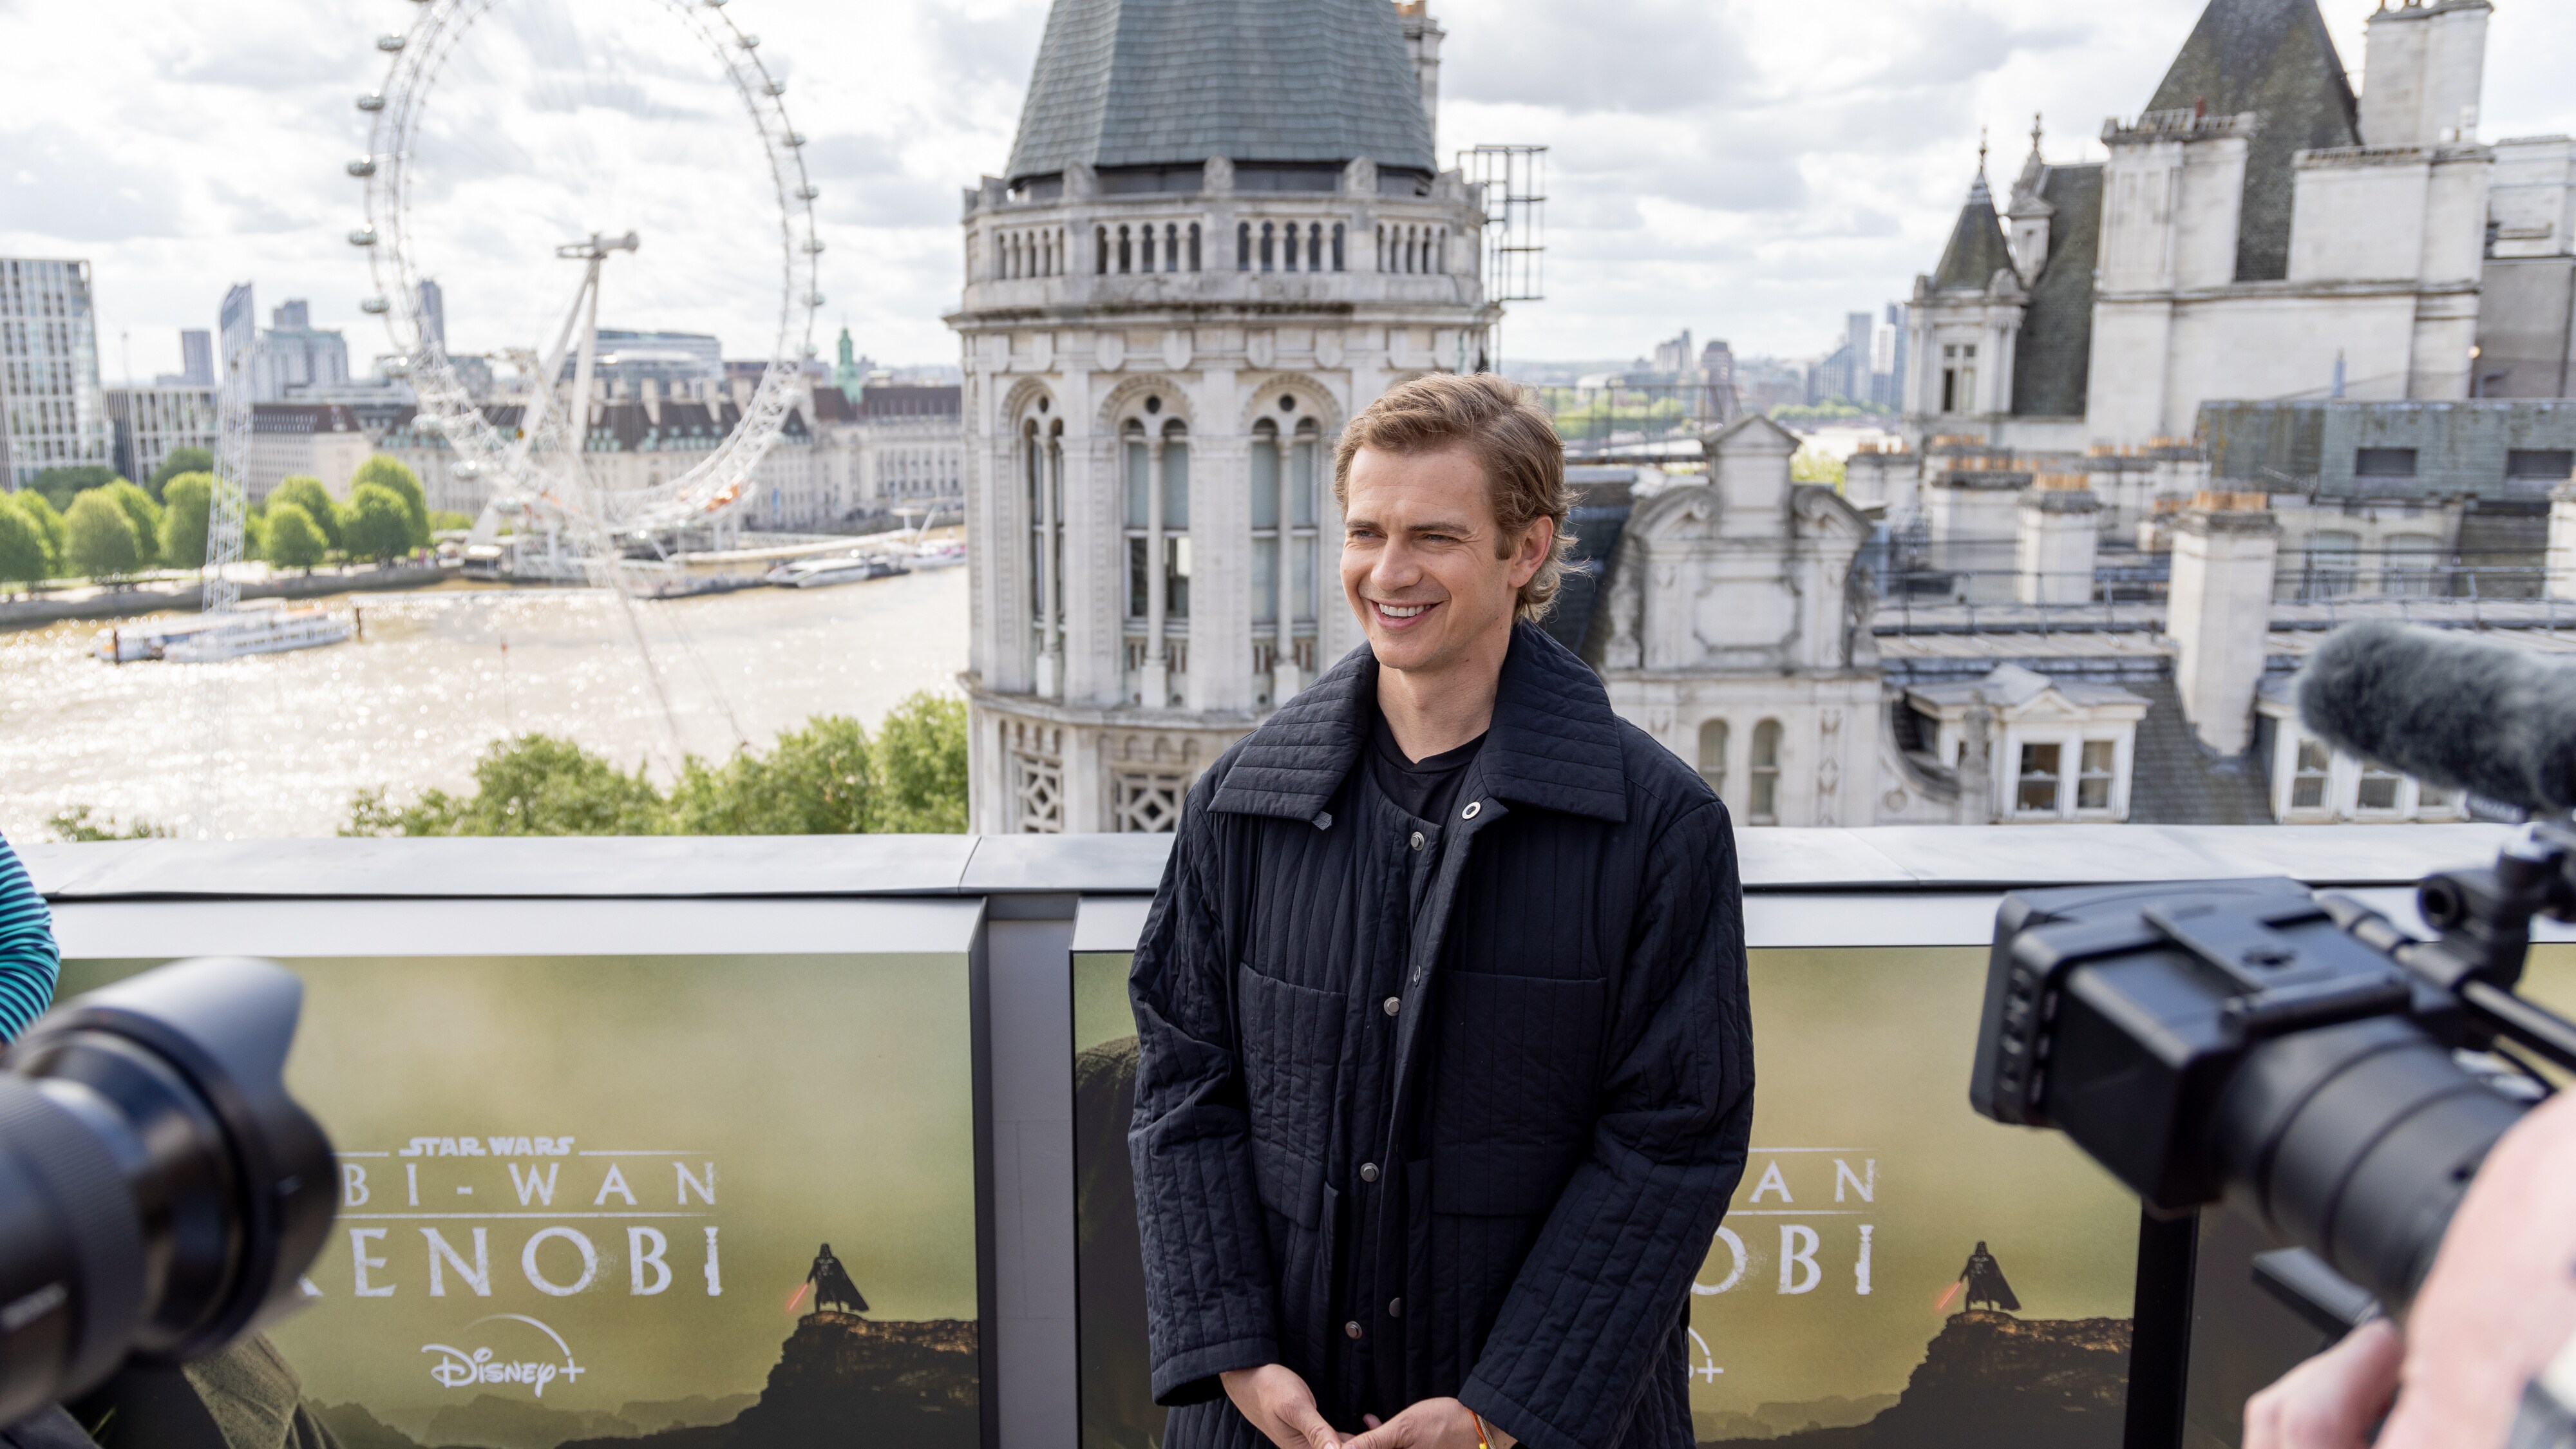 LONDON, ENGLAND - MAY 12:  Hayden Christensen attends the photocall for the new Disney+ limited series "Obi Wan Kenobi" at the Corinthia Hotel on May 12, 2022 in London, England. Obi-Wan Kenobi will be exclusively available on Disney+ from May 27. (Photo by StillMoving.net for Disney)